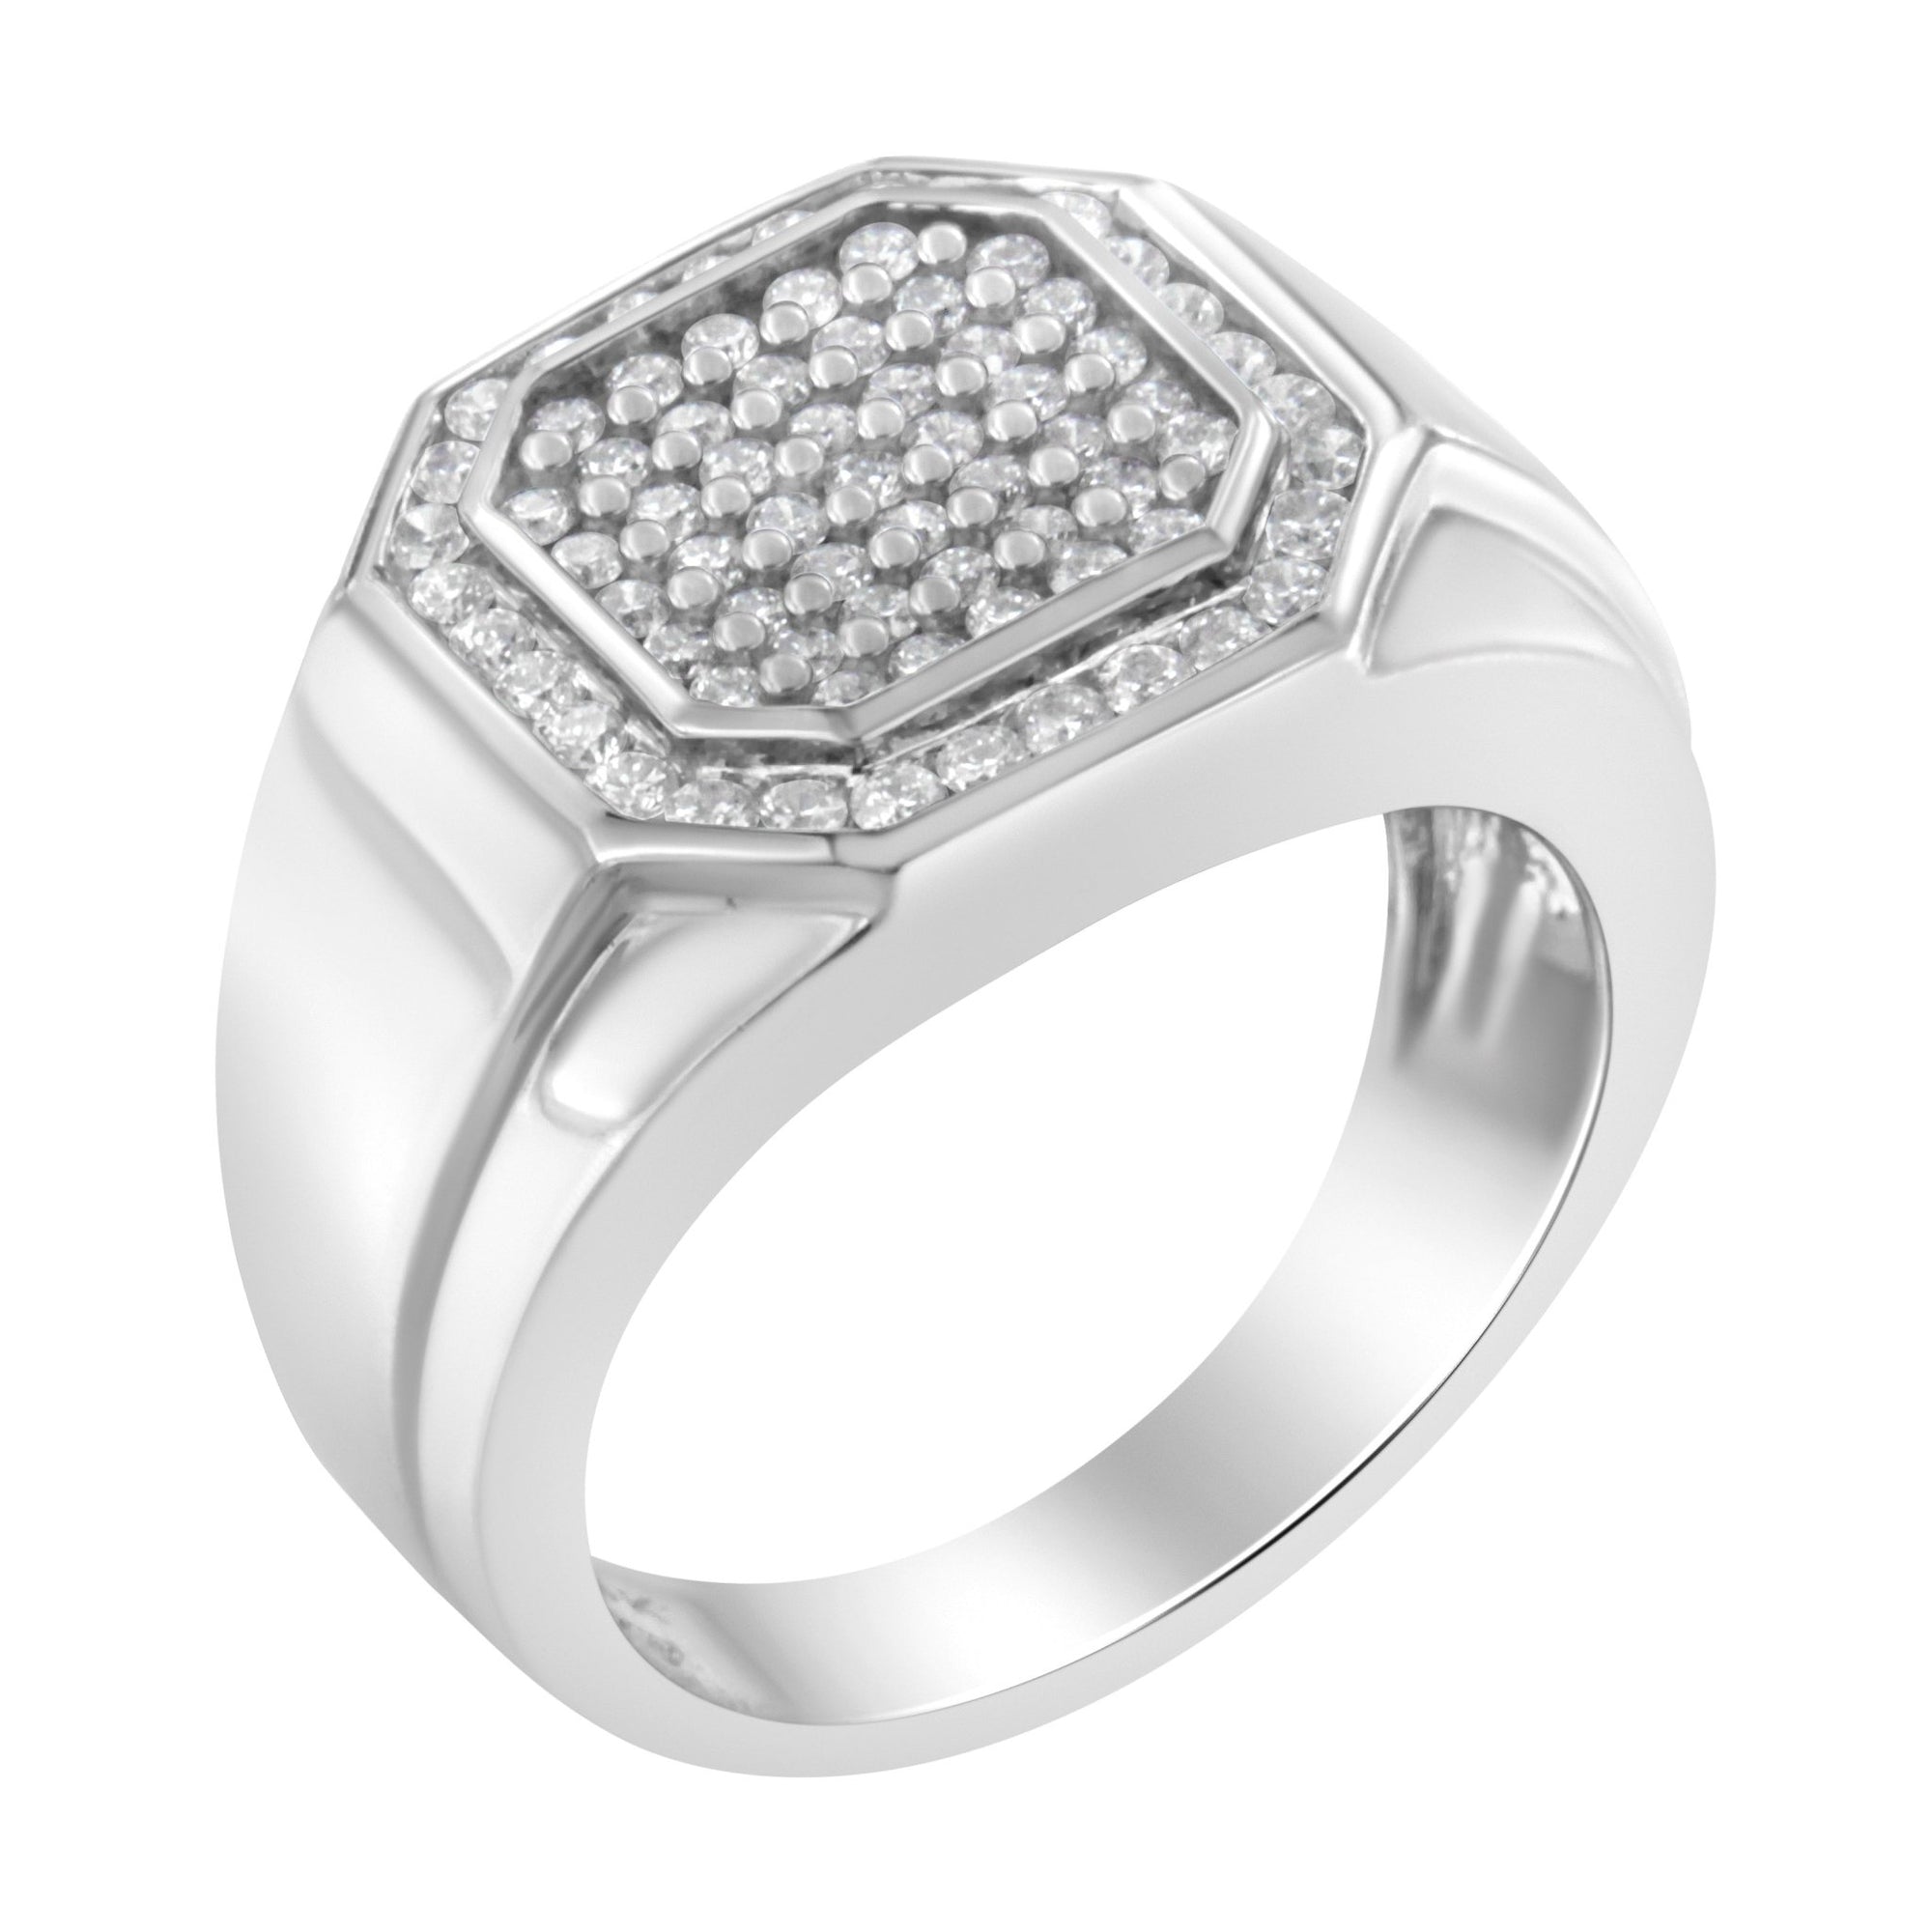 14KT White Gold Diamond Pentagon Shaped Men's Ring (1 cttw, H-I Color, SI2-I1 Clarity) - LinkagejewelrydesignLinkagejewelrydesign